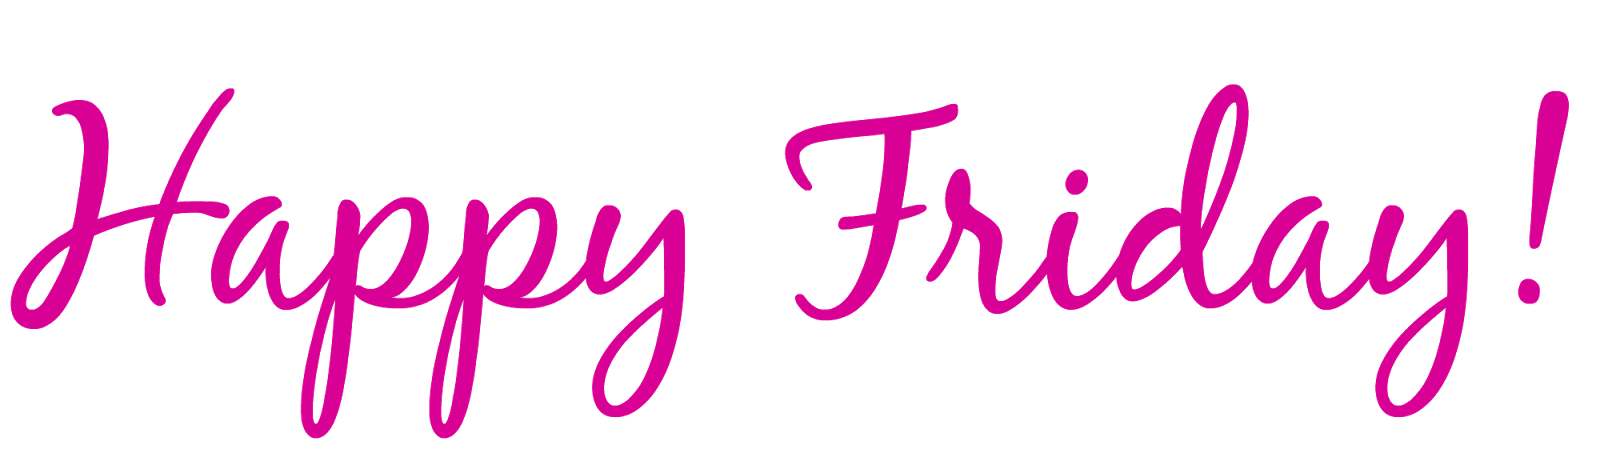 Happy Friday Png Hd Free Transparent Happy Friday Hd Png Images Pluspng